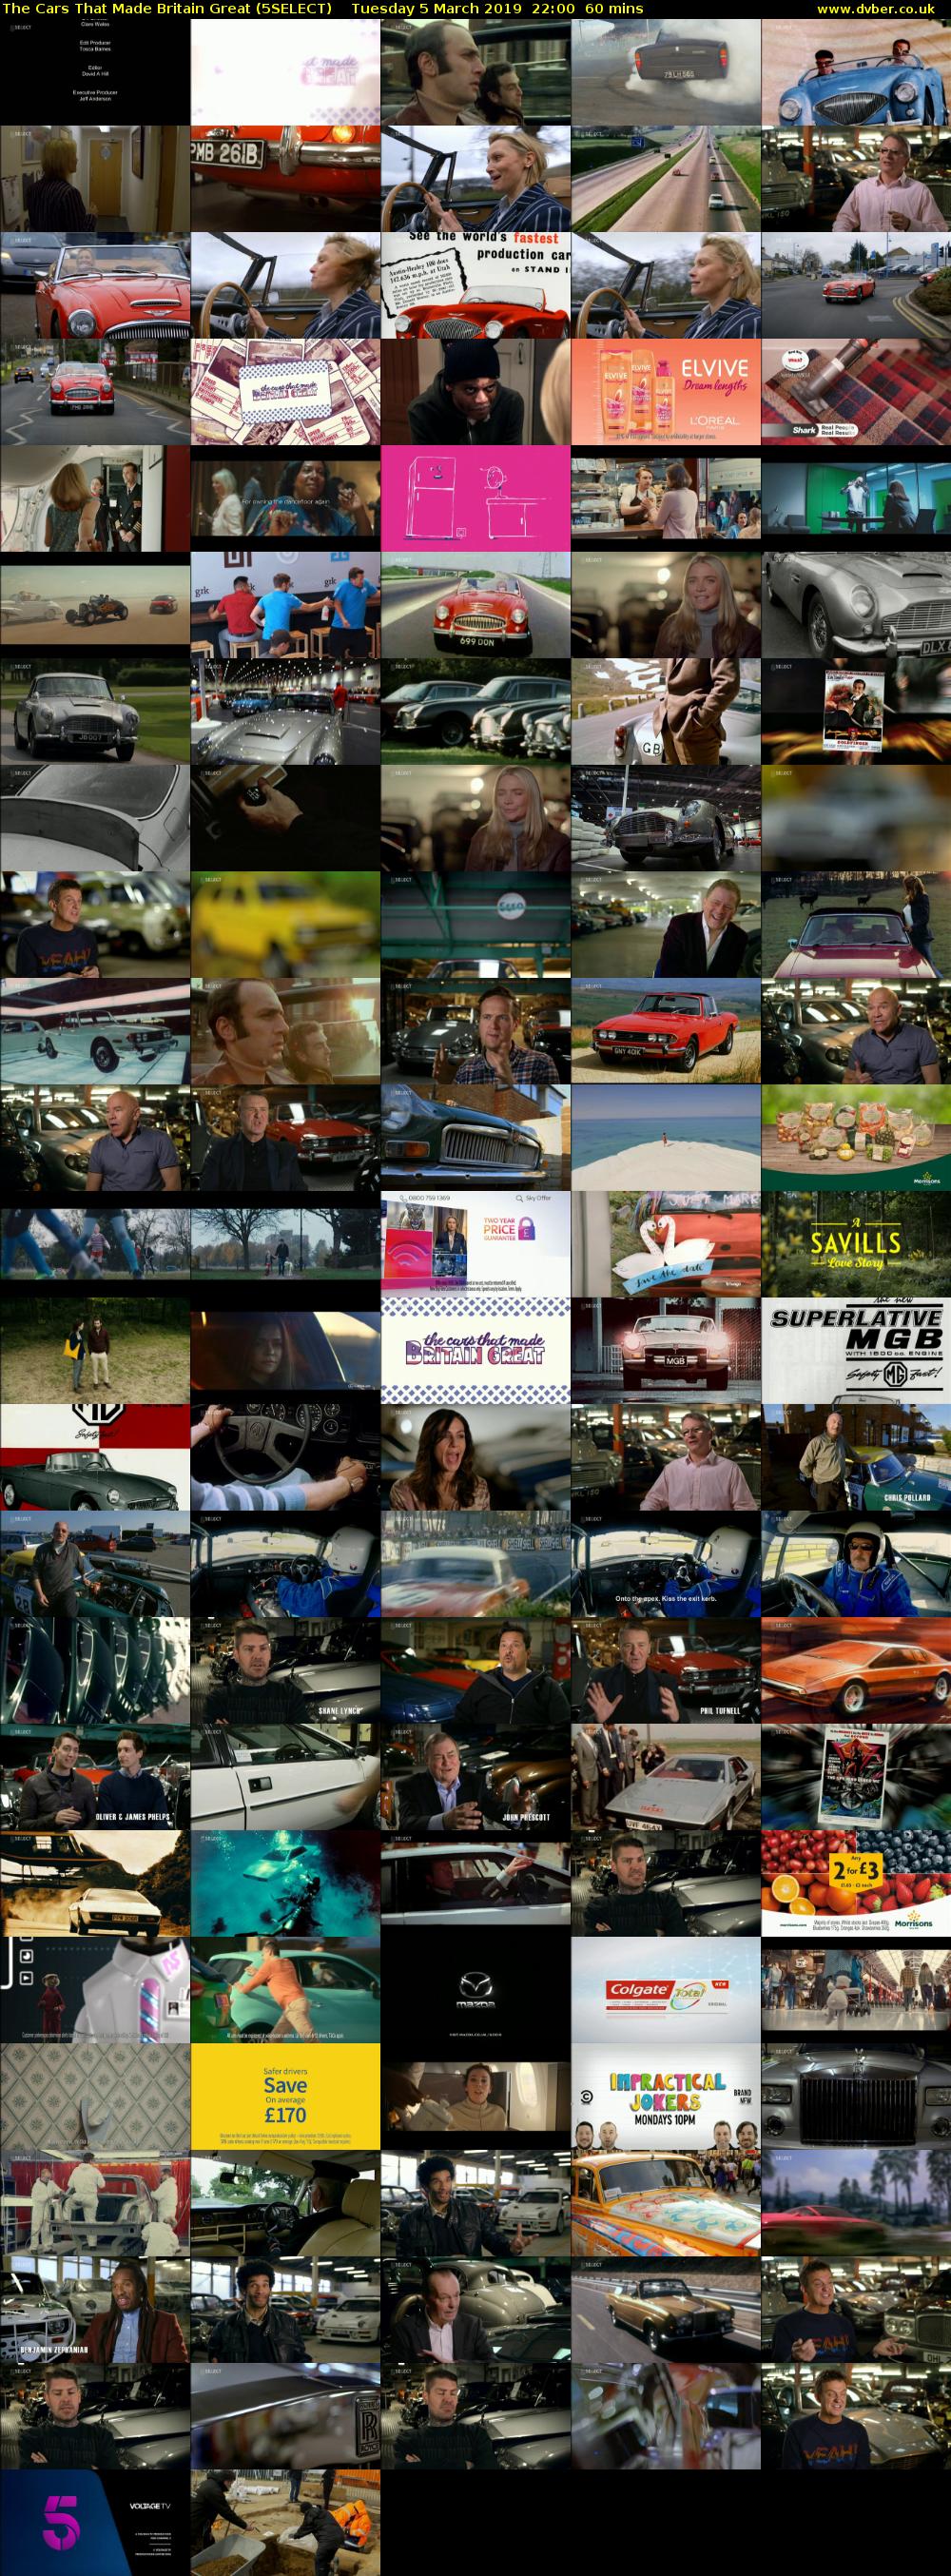 The Cars That Made Britain Great (5SELECT) Tuesday 5 March 2019 22:00 - 23:00